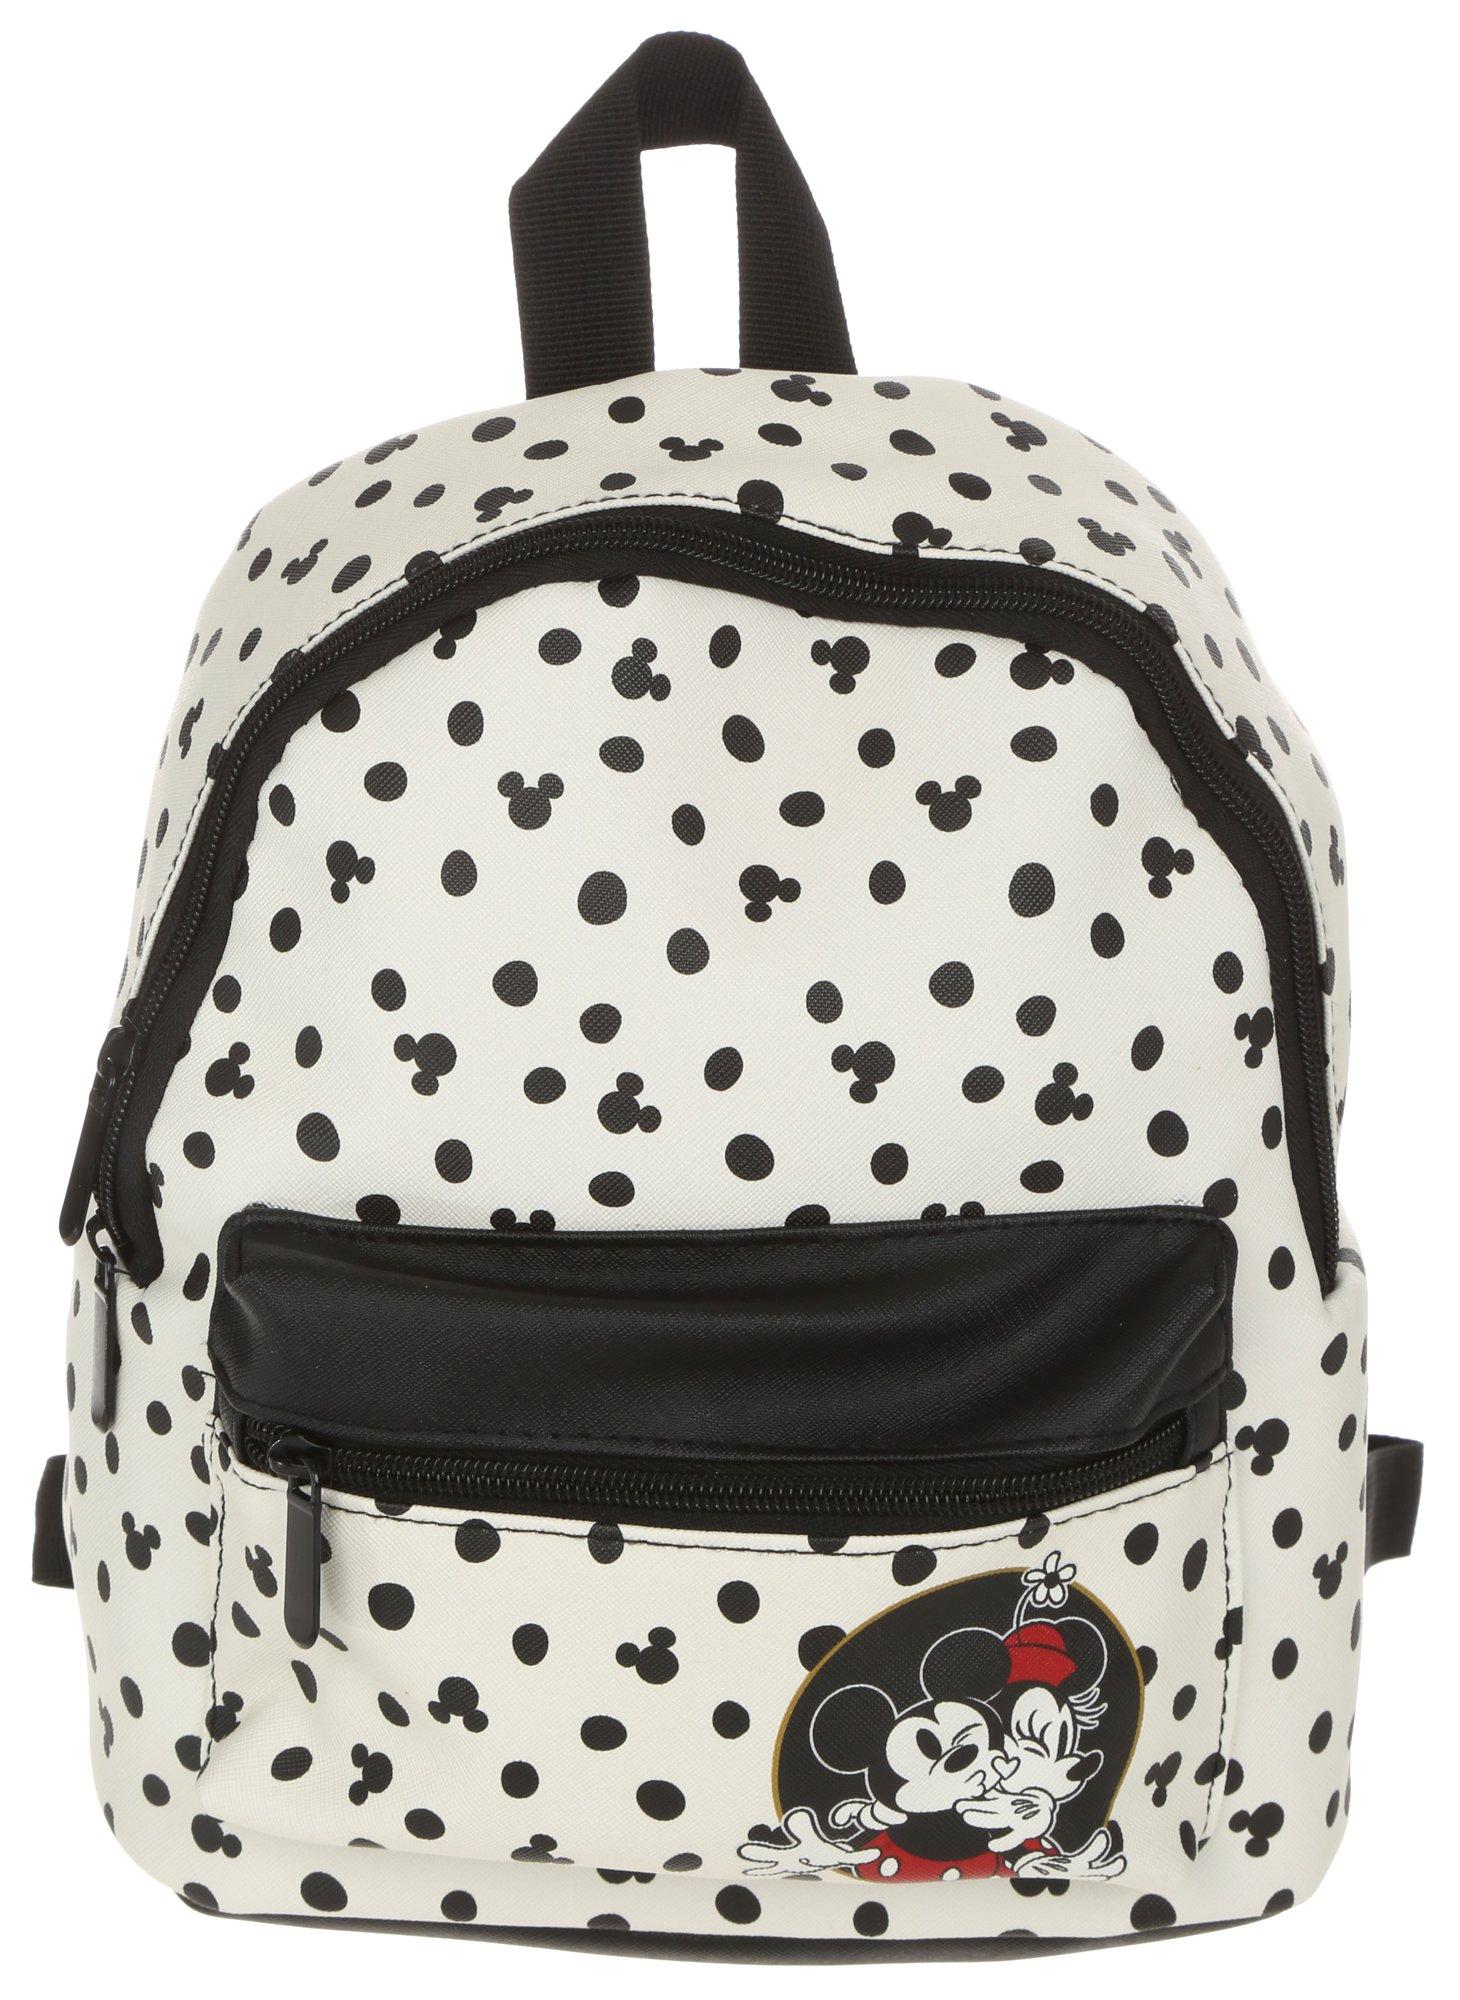 Mickey & Minnie Faux Leather Fashion Backpack